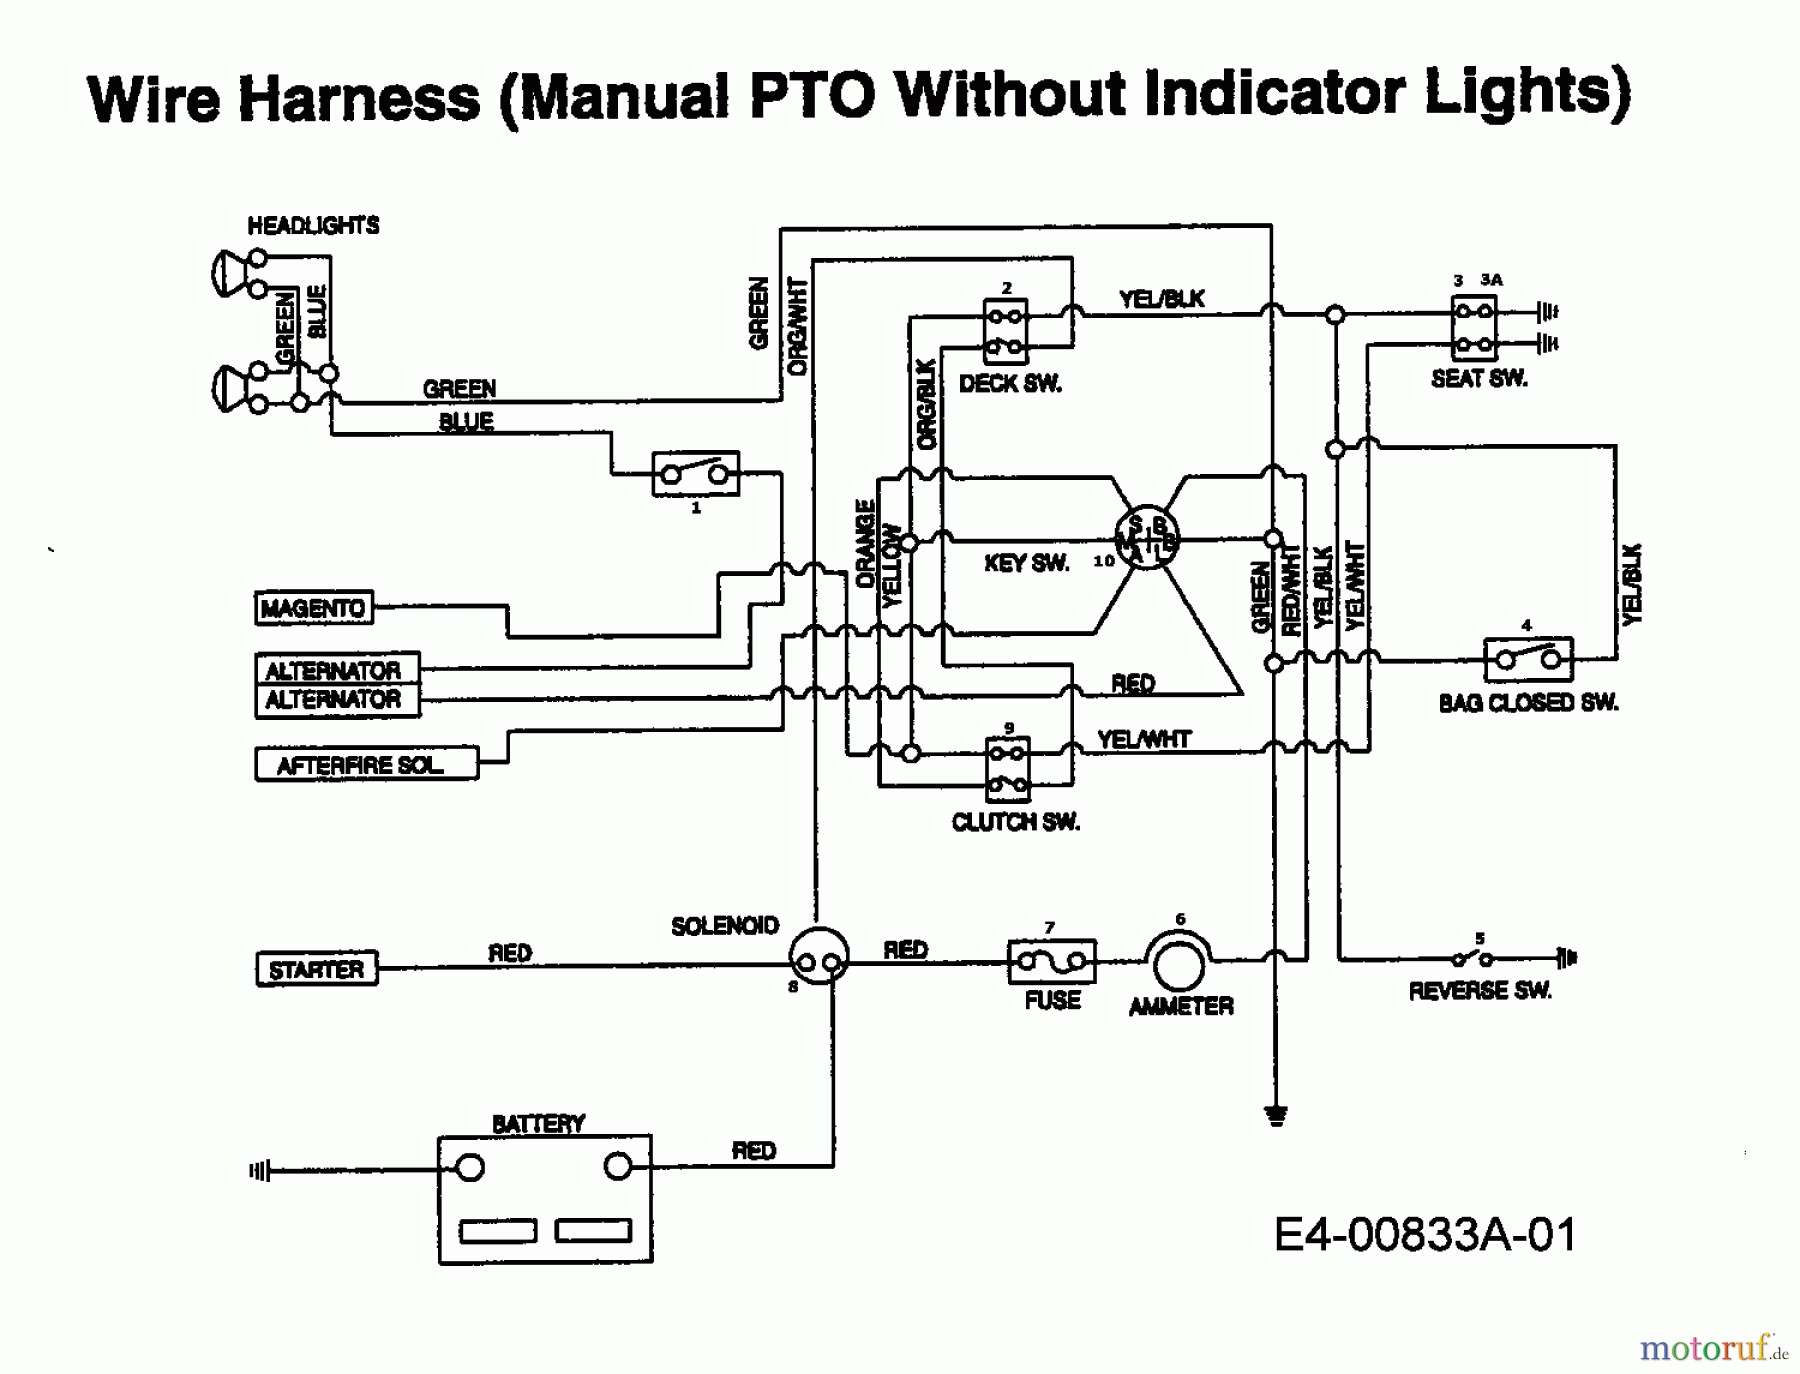  Raiffeisen Lawn tractors RMH 15/102 H 13AD793N628  (1997) Wiring diagram without indicator lights